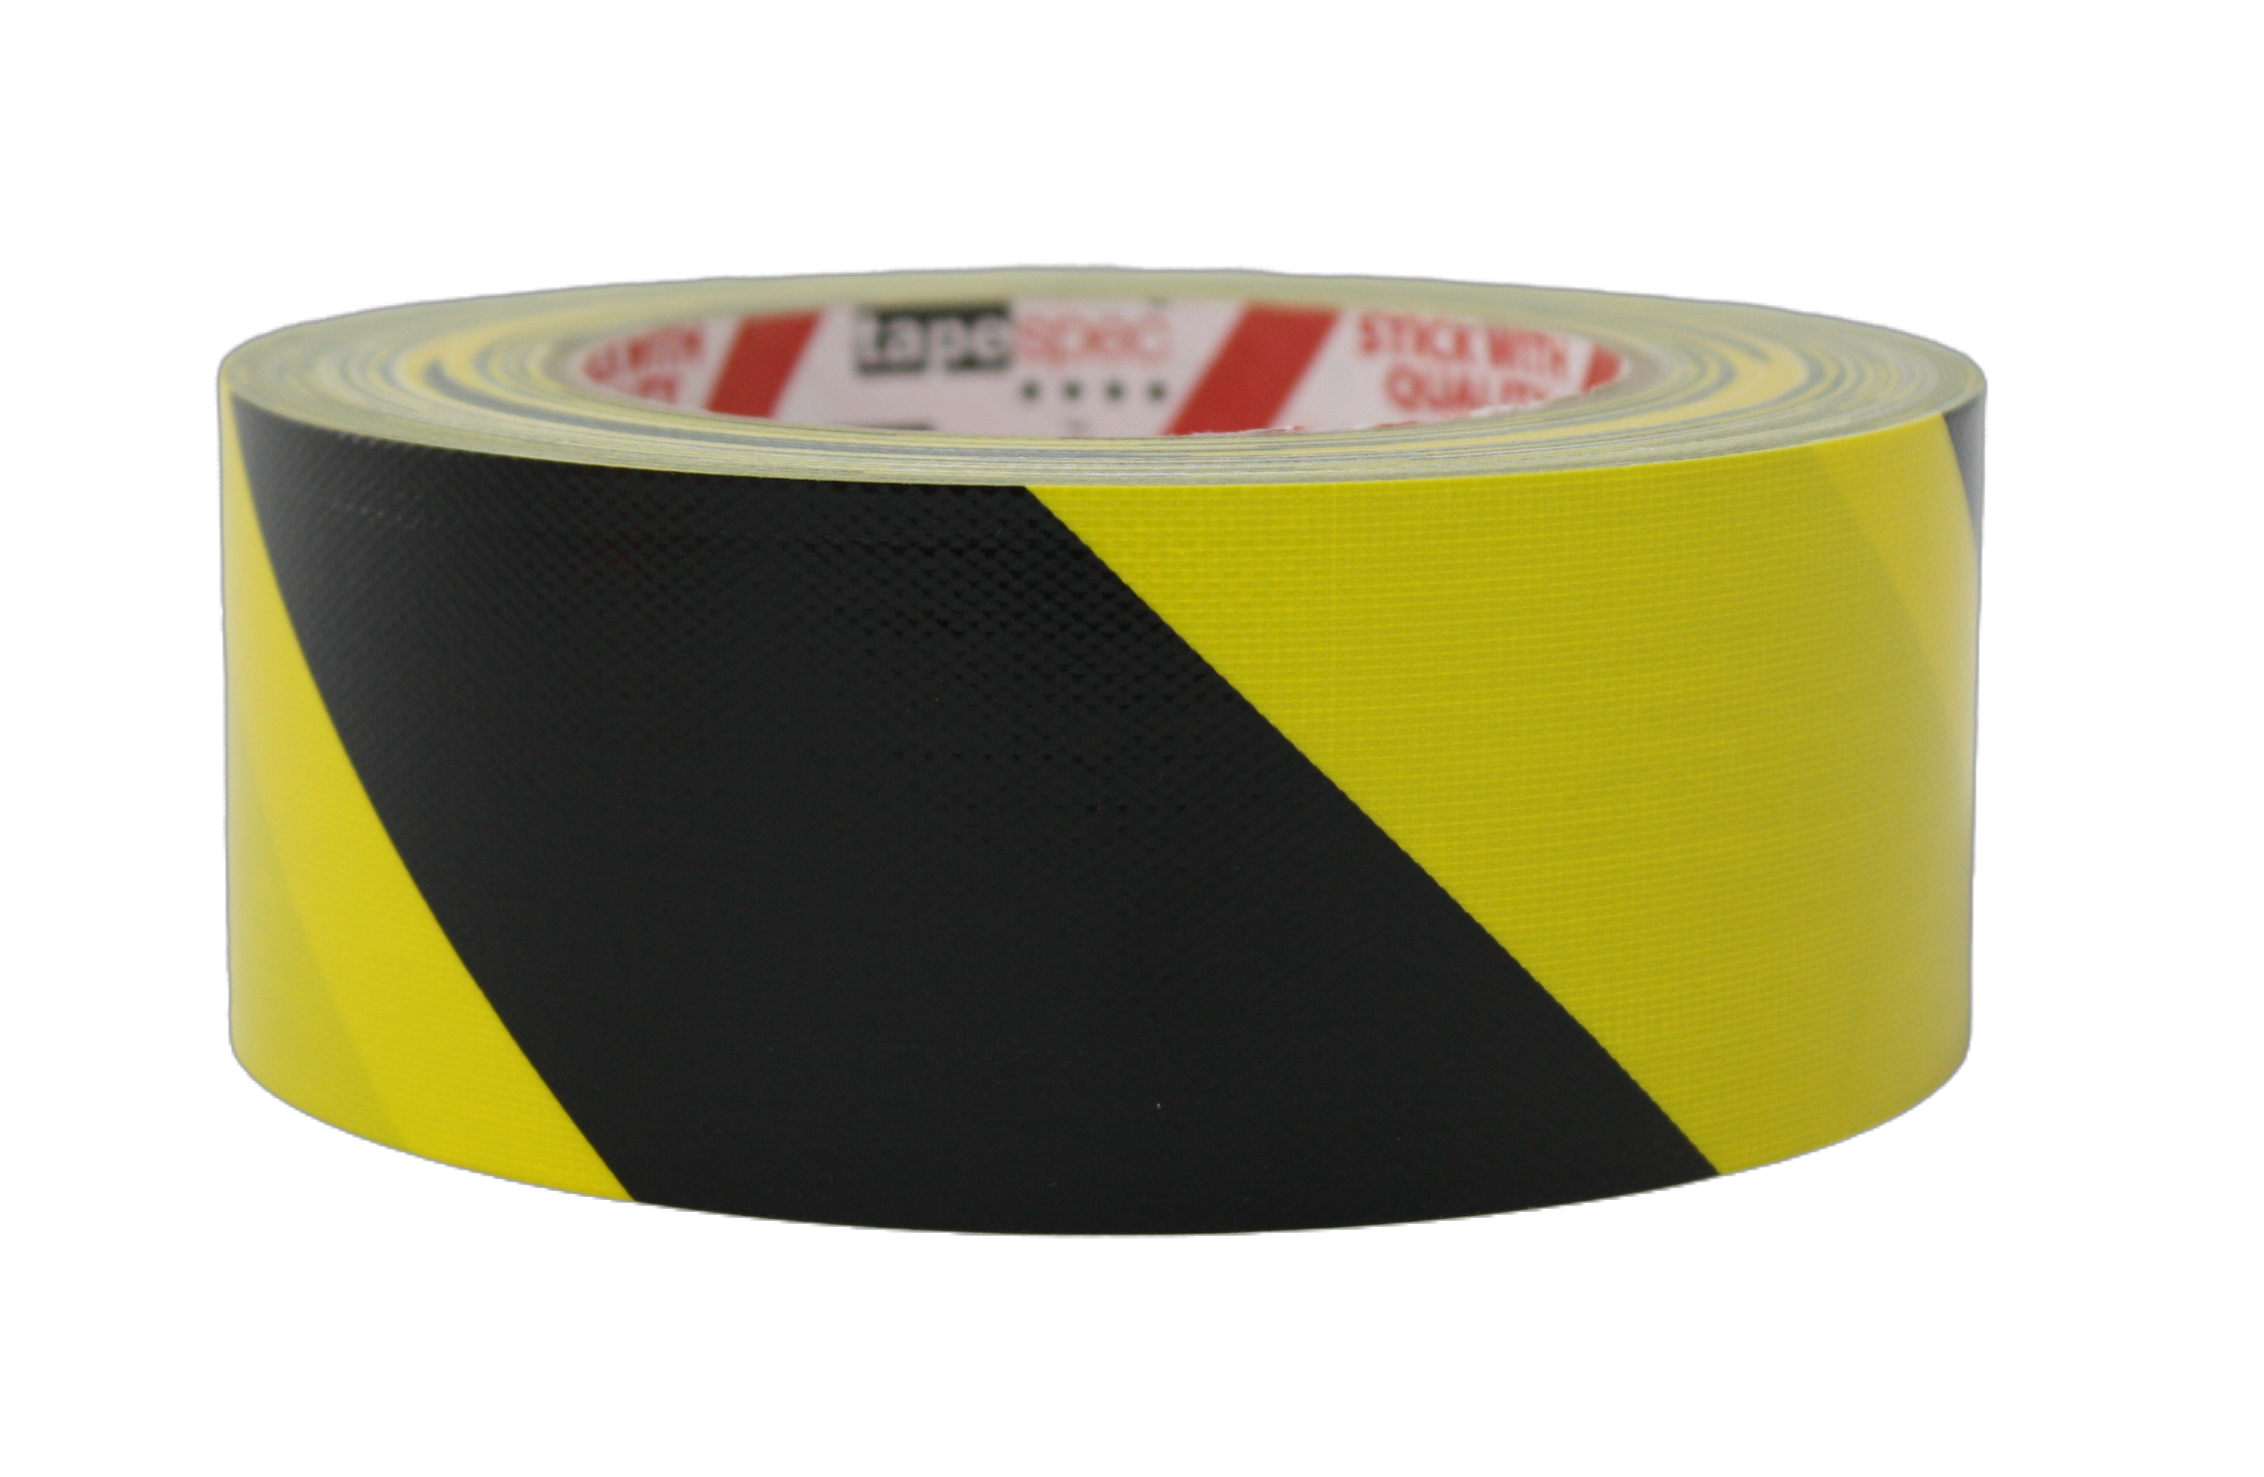 Close up of the texture of the tape, showing both black and yellow stripes